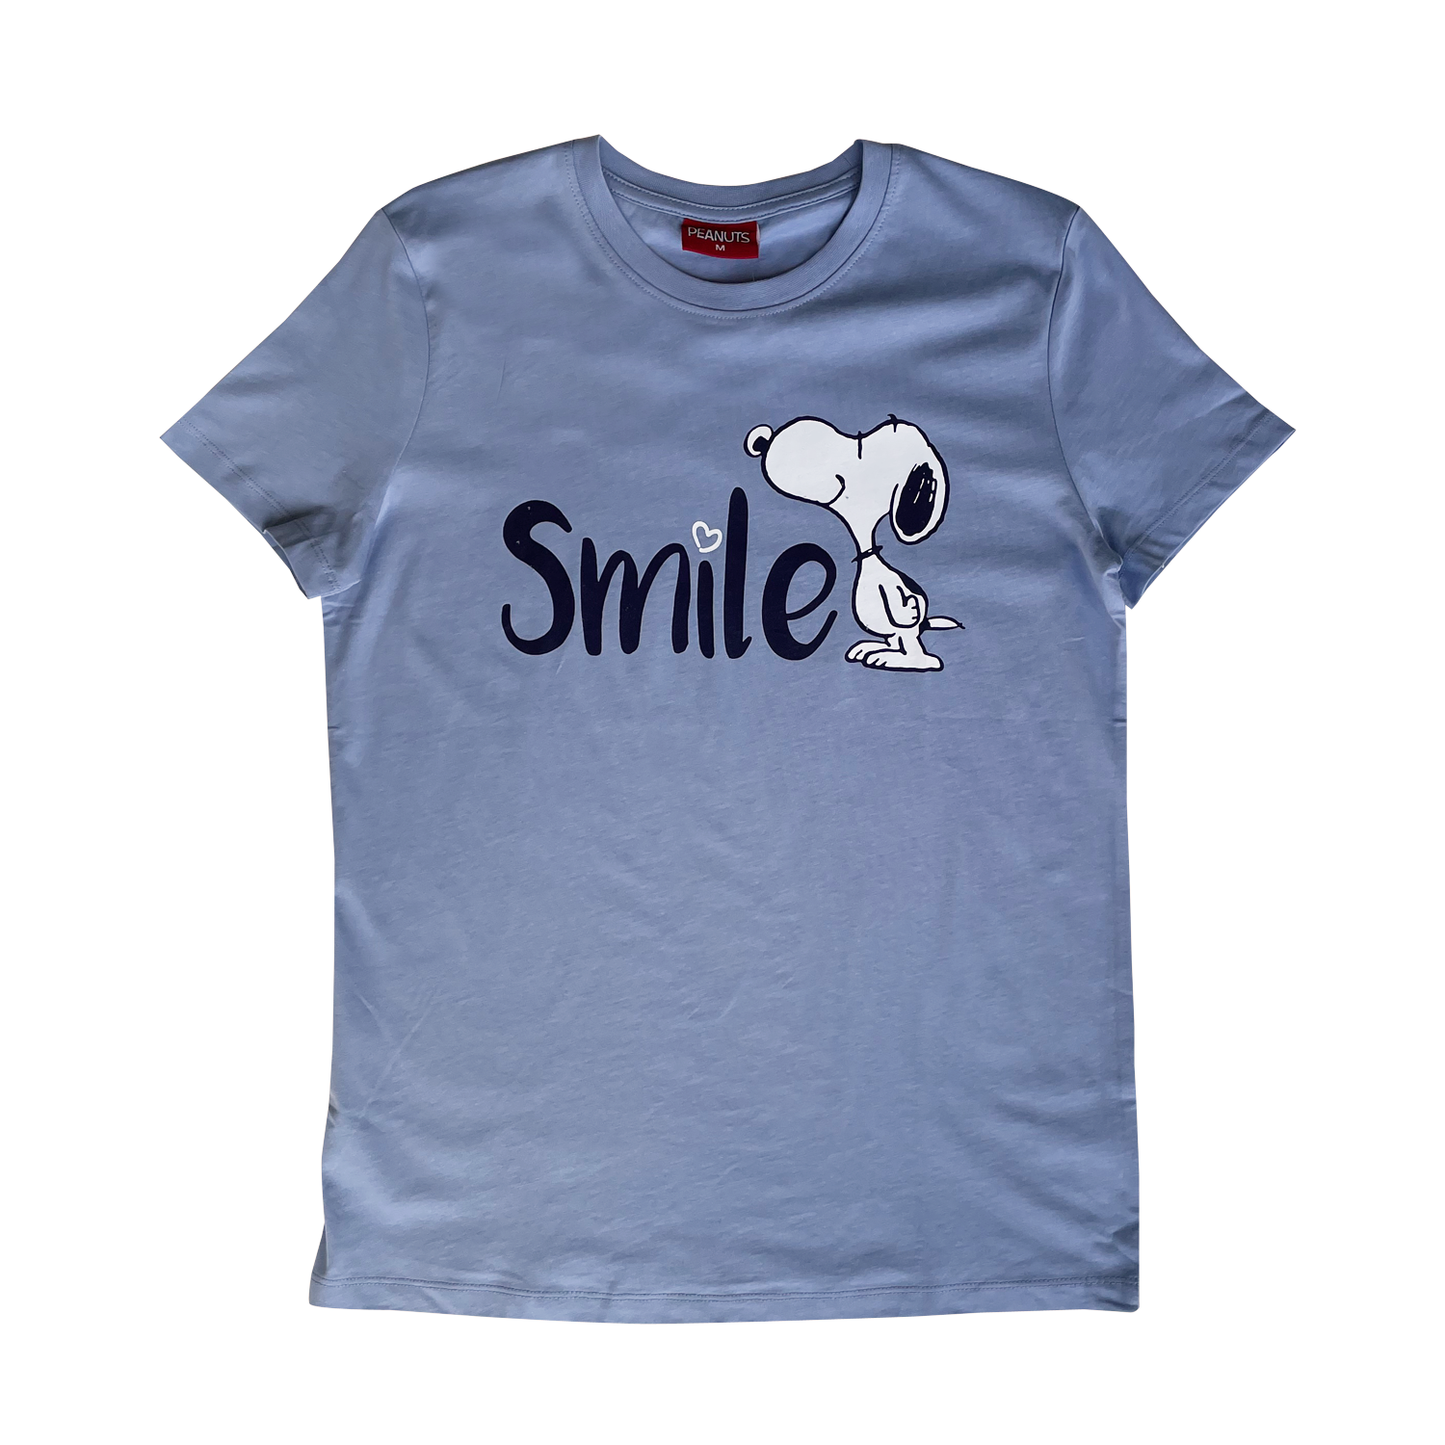 Peanuts - Snoopy Smile T-Shirt